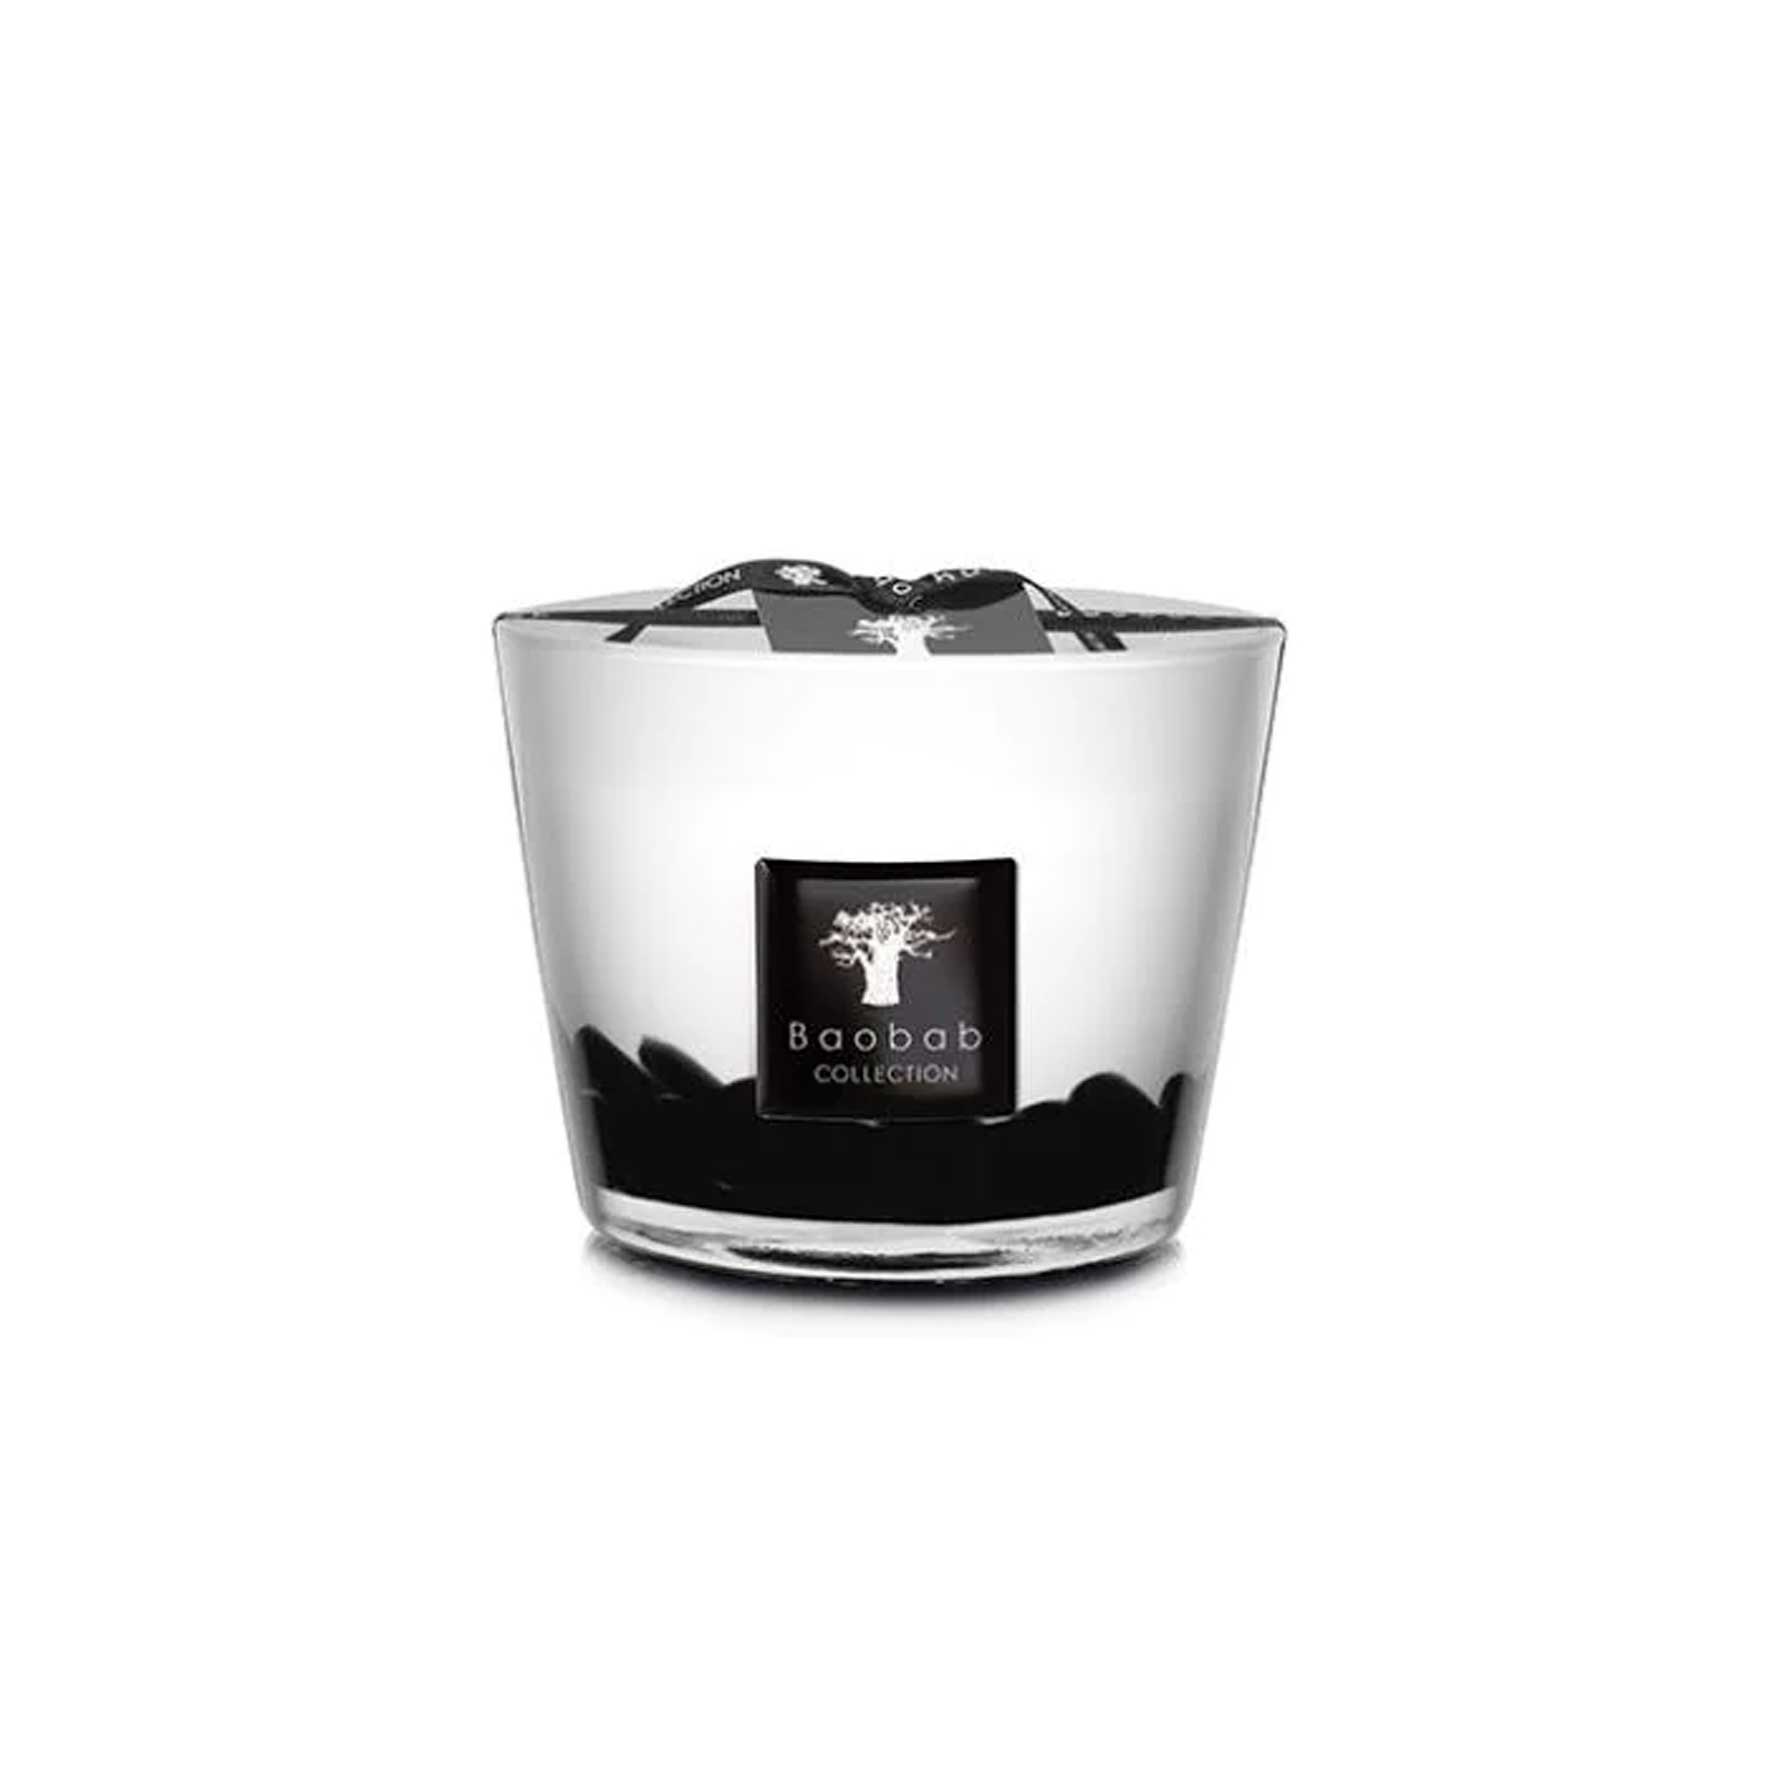 Baobab Collection Feathers Scented Candle, Black Glass | Barker & Stonehouse